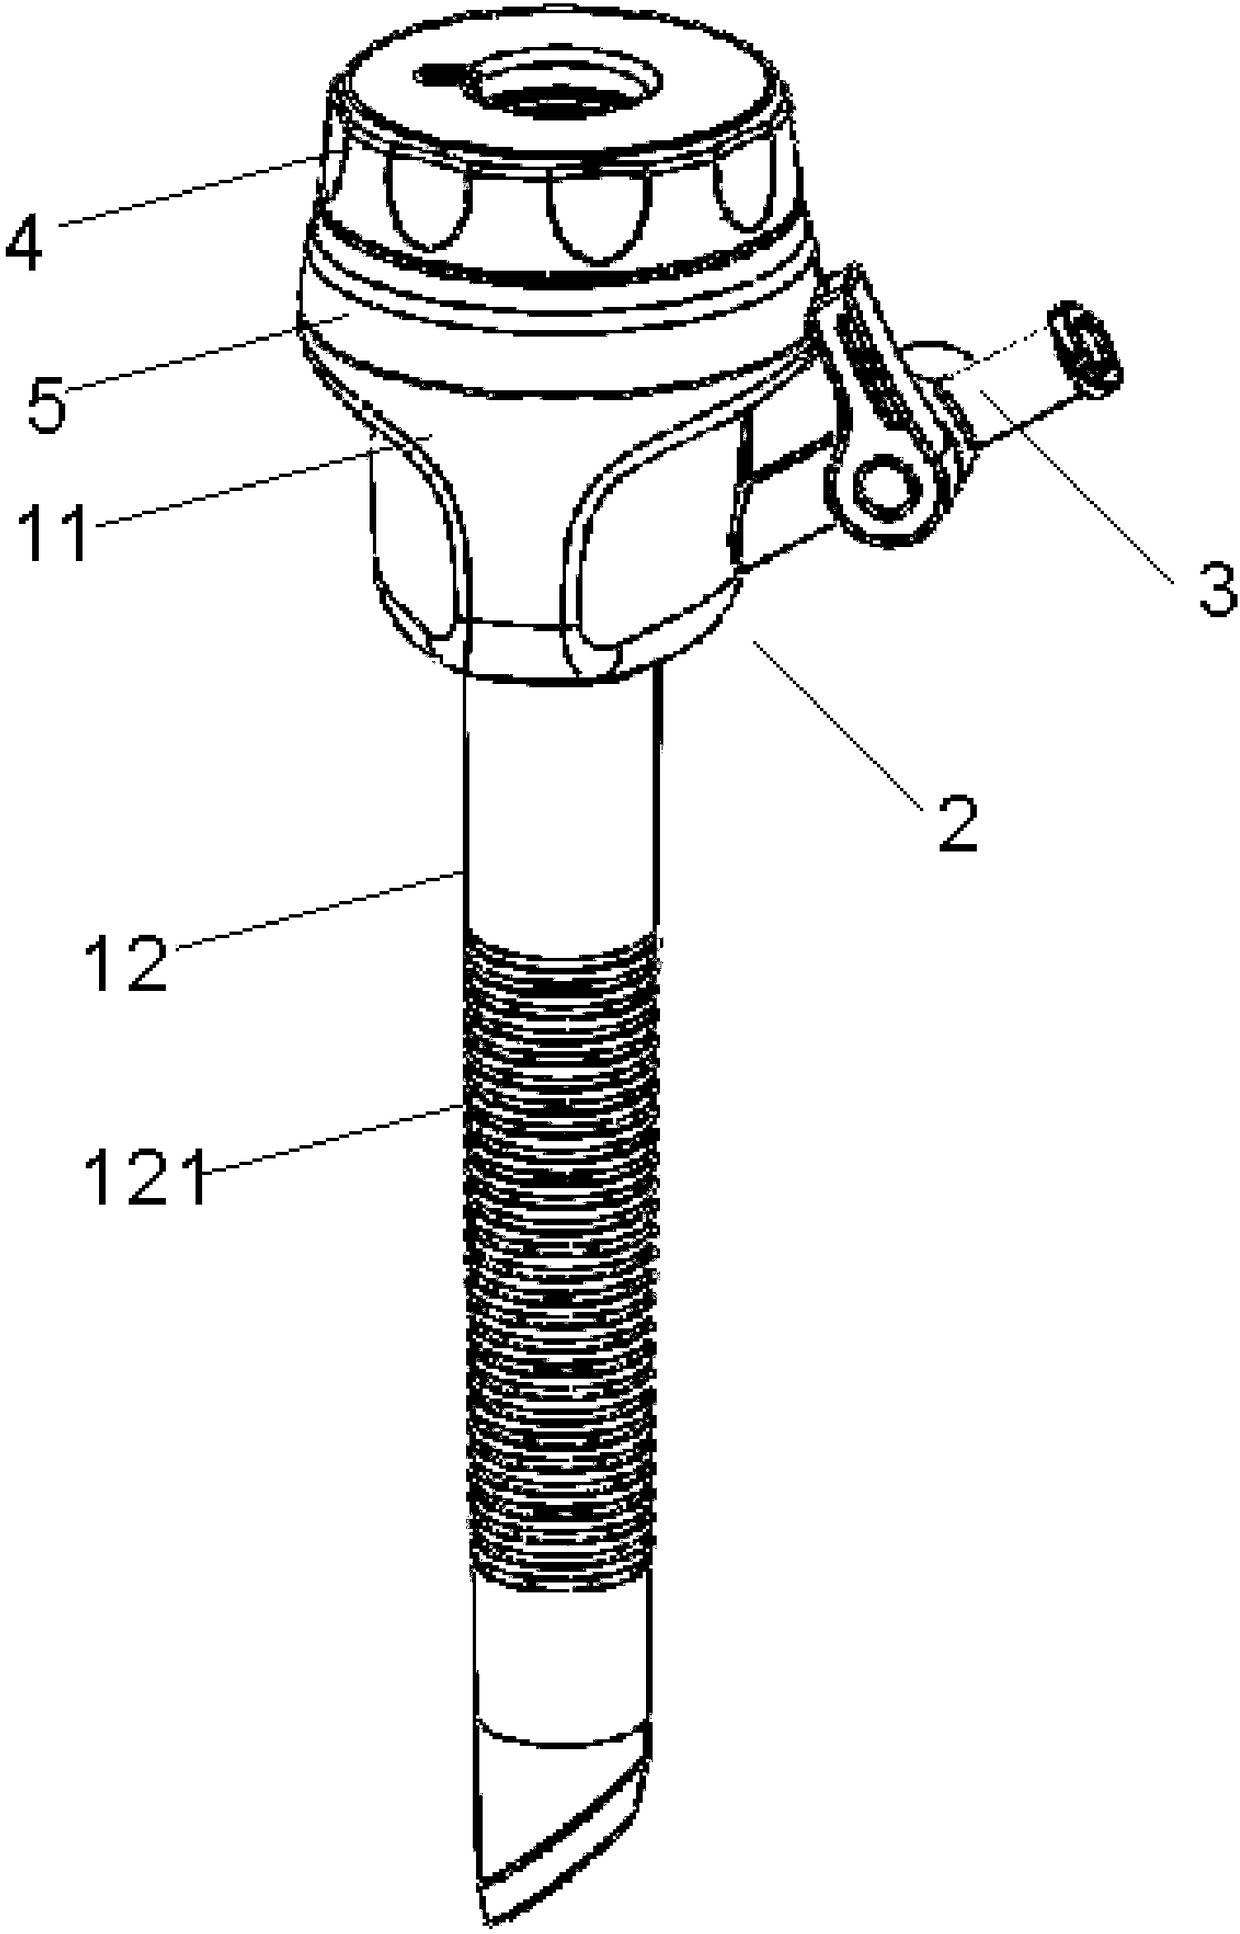 Laparoscope puncture outfit device